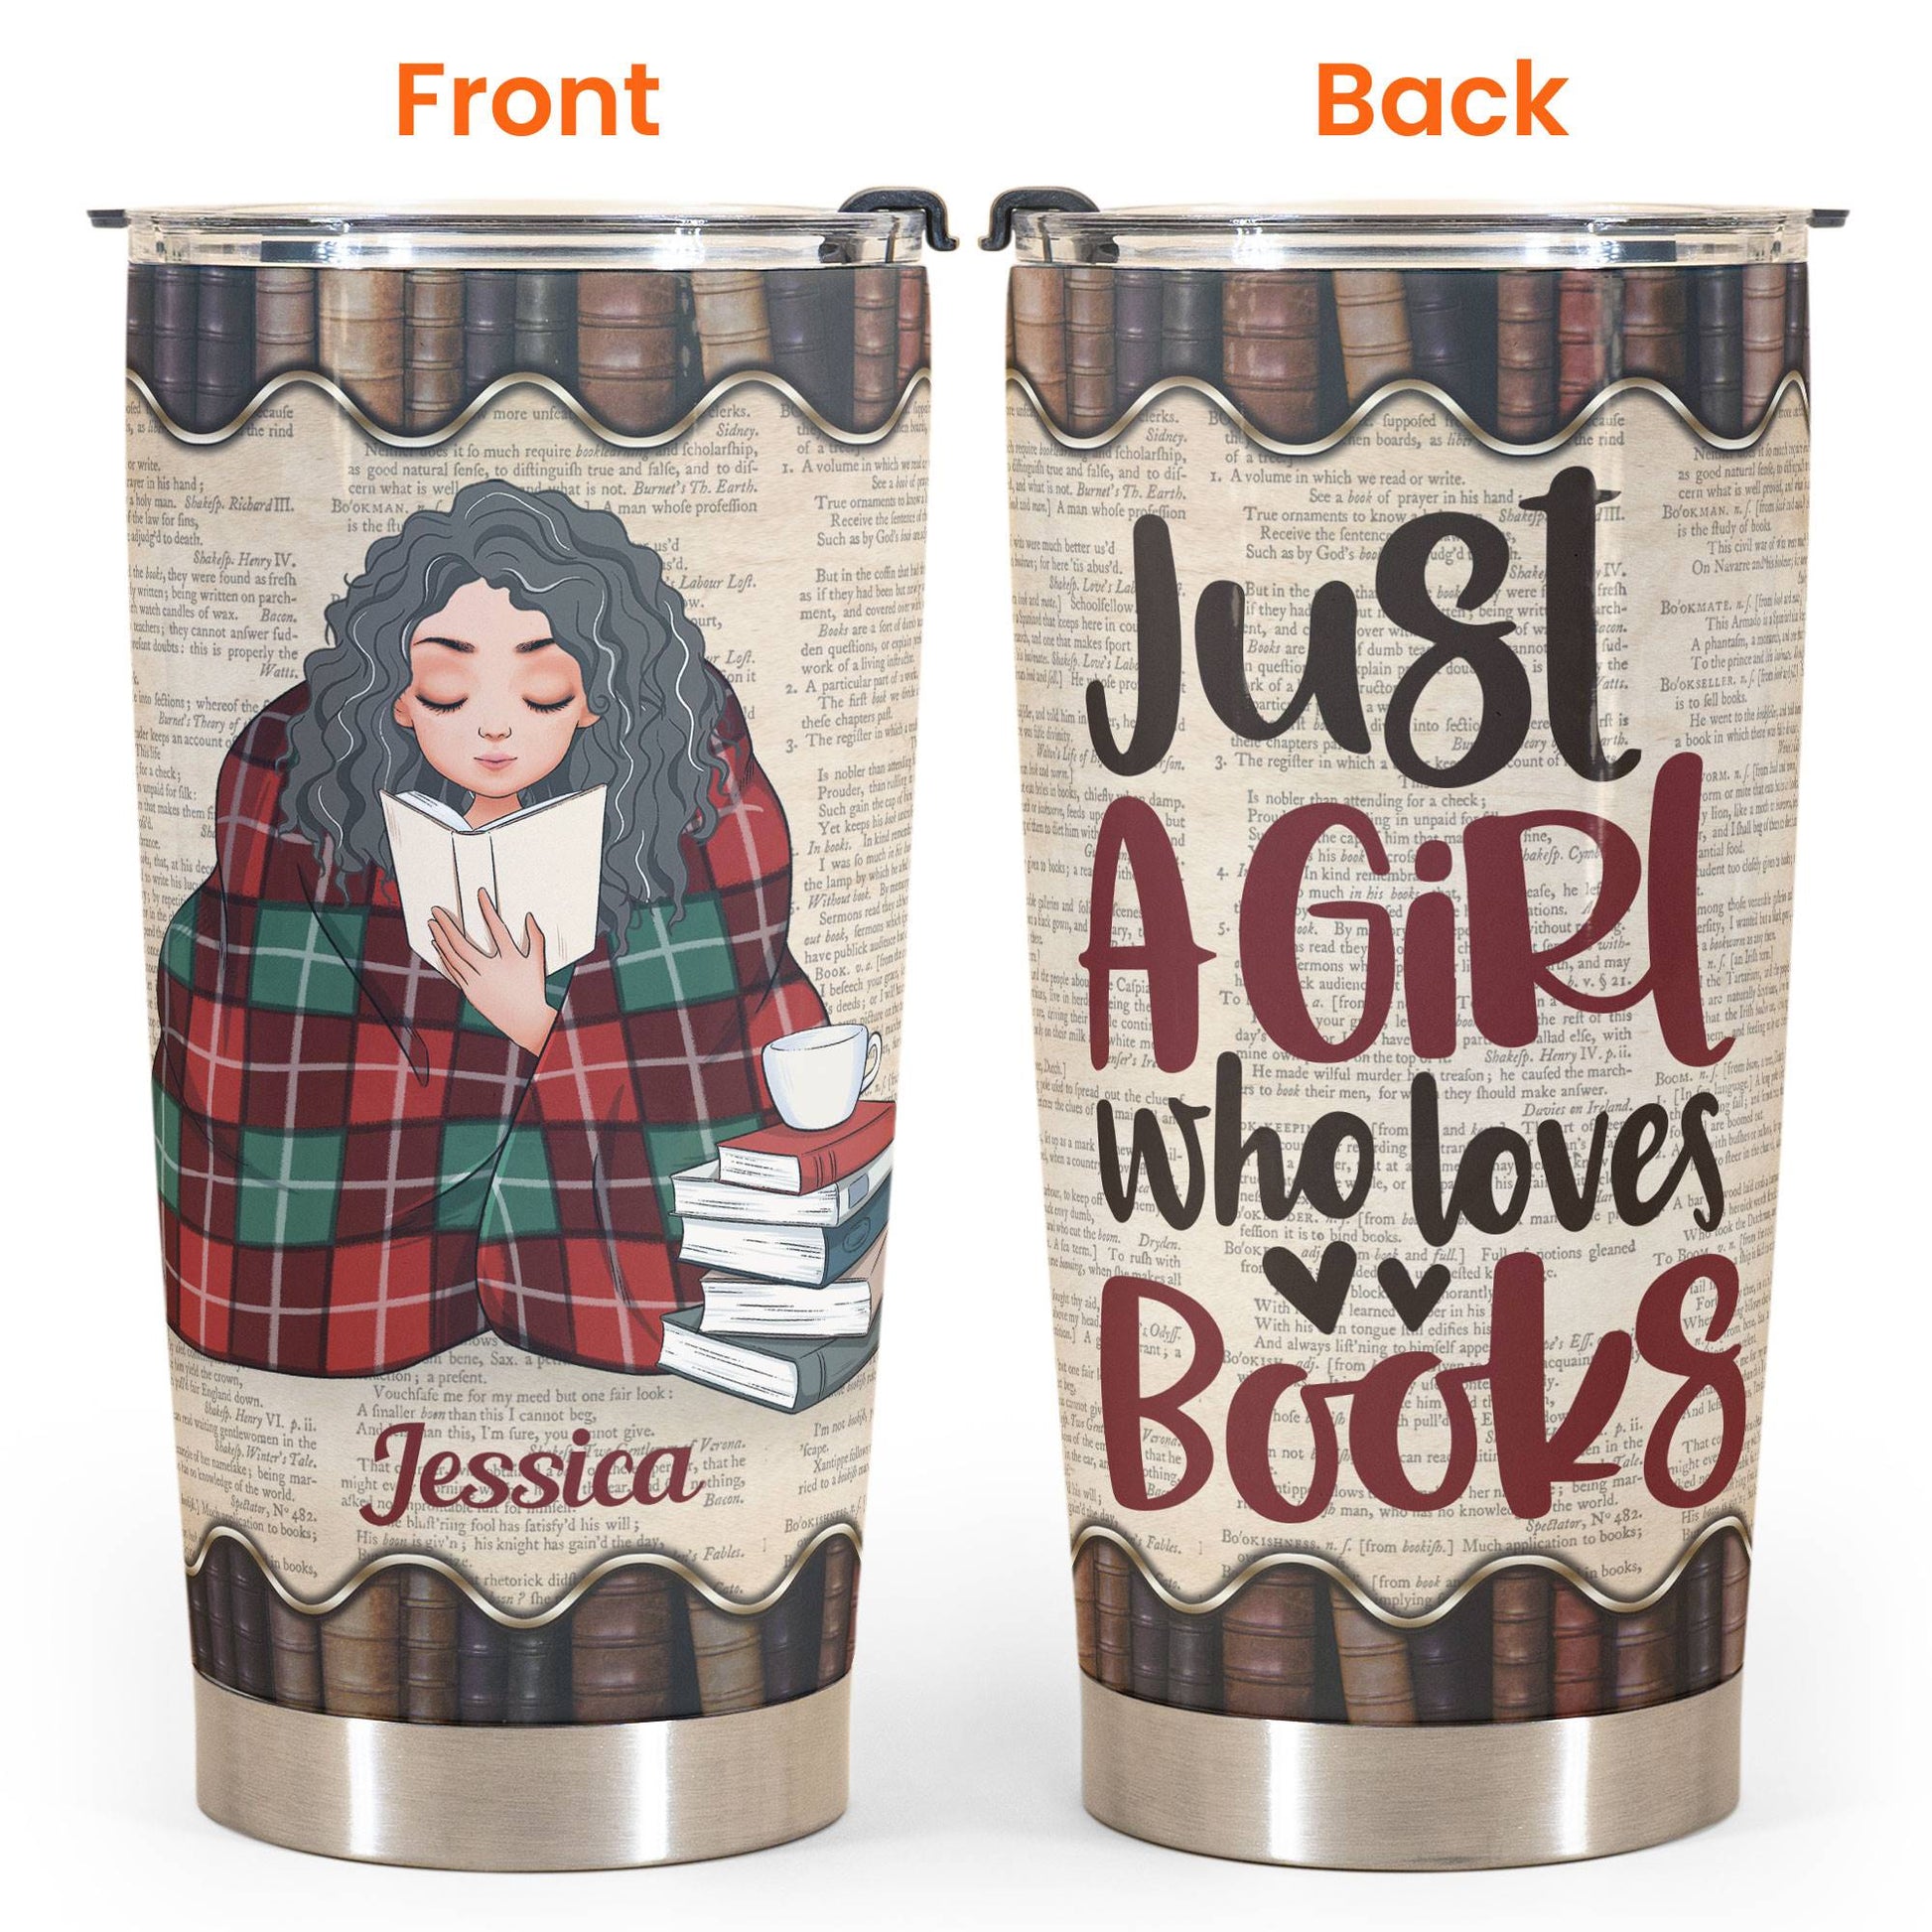 Just A Girl Who Loves Books  - Personalized Tumbler Cup - Birthday Gift For Book Lovers, Bookworms 